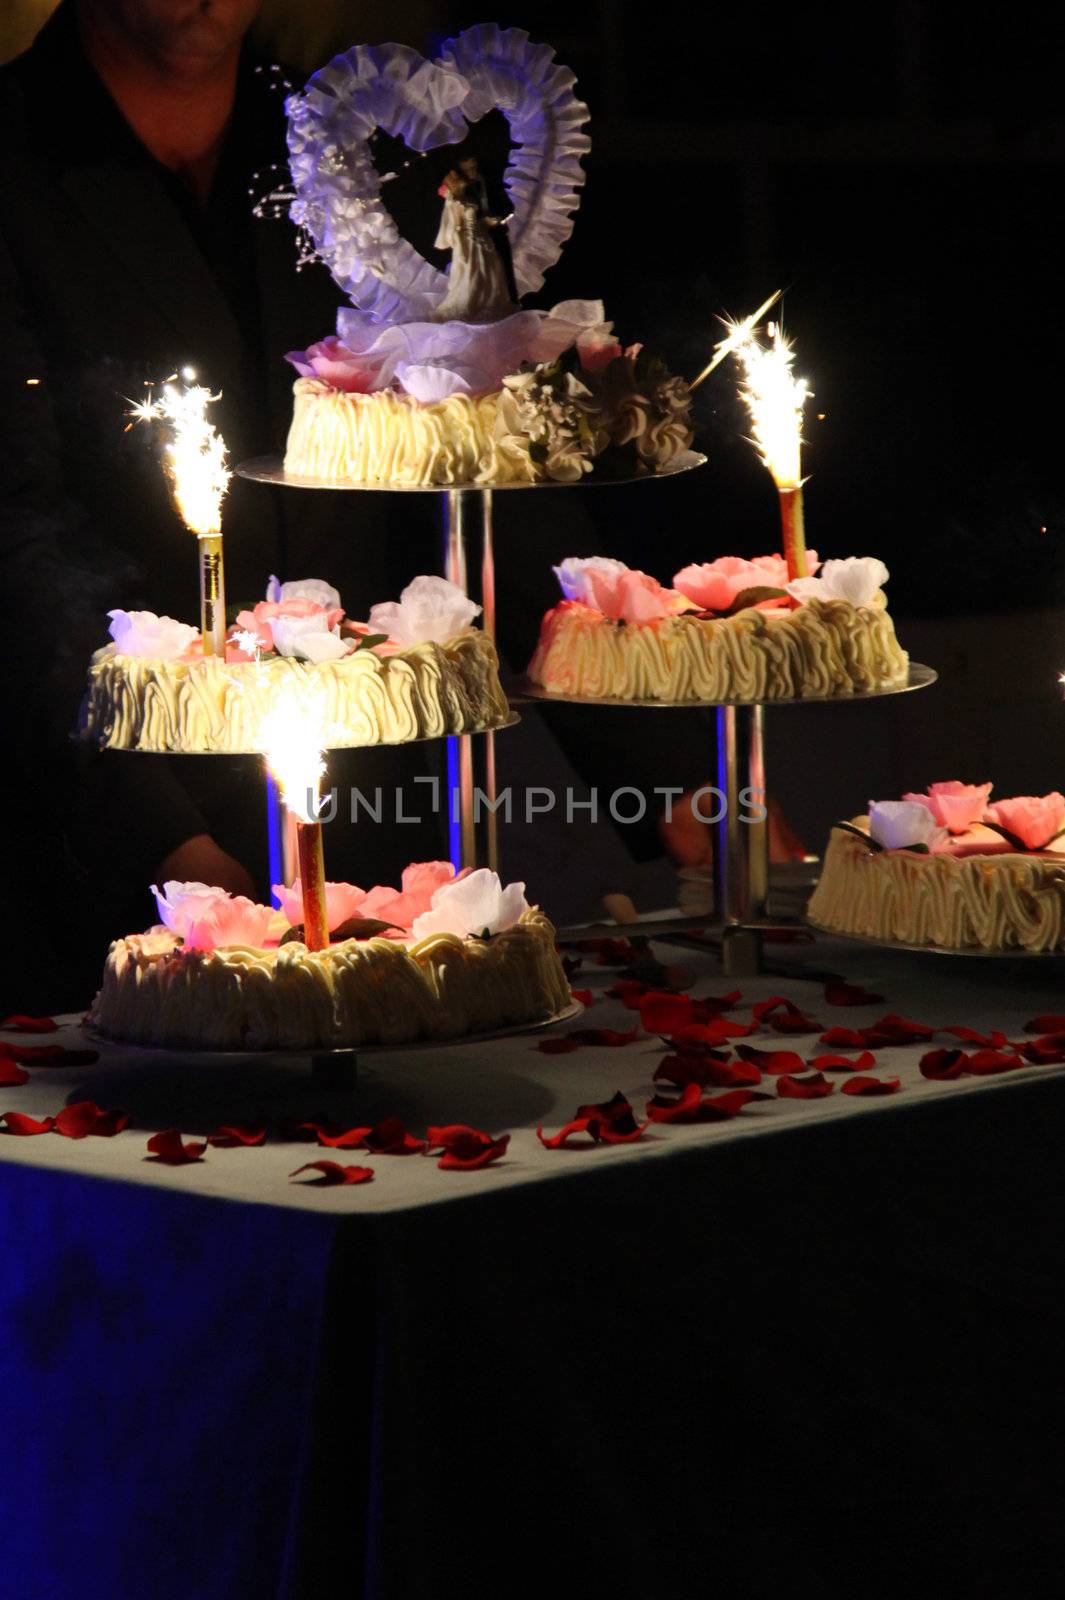 Wedding cake with candles and fireworks by Farina6000